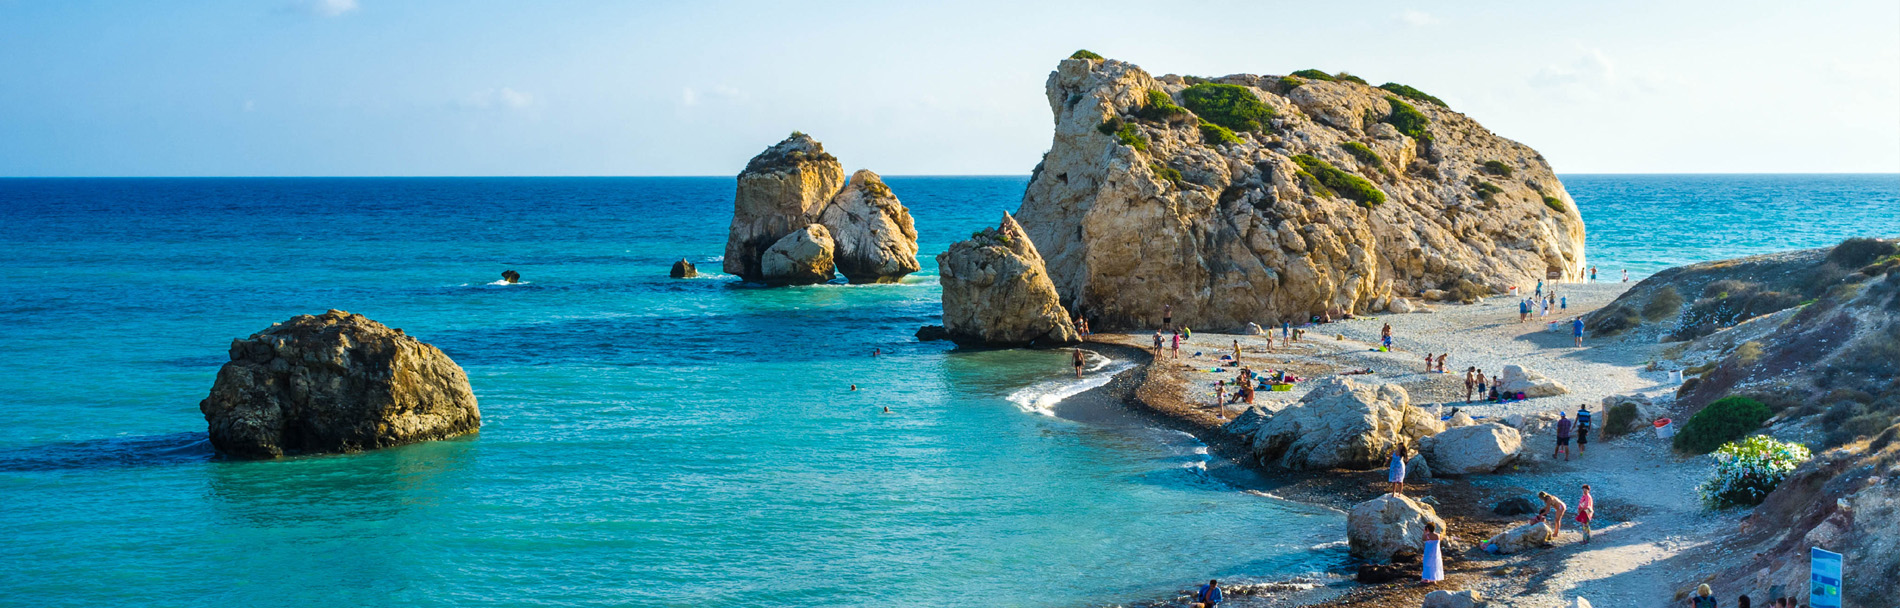 Cyprus Tour Package - 6 Nights